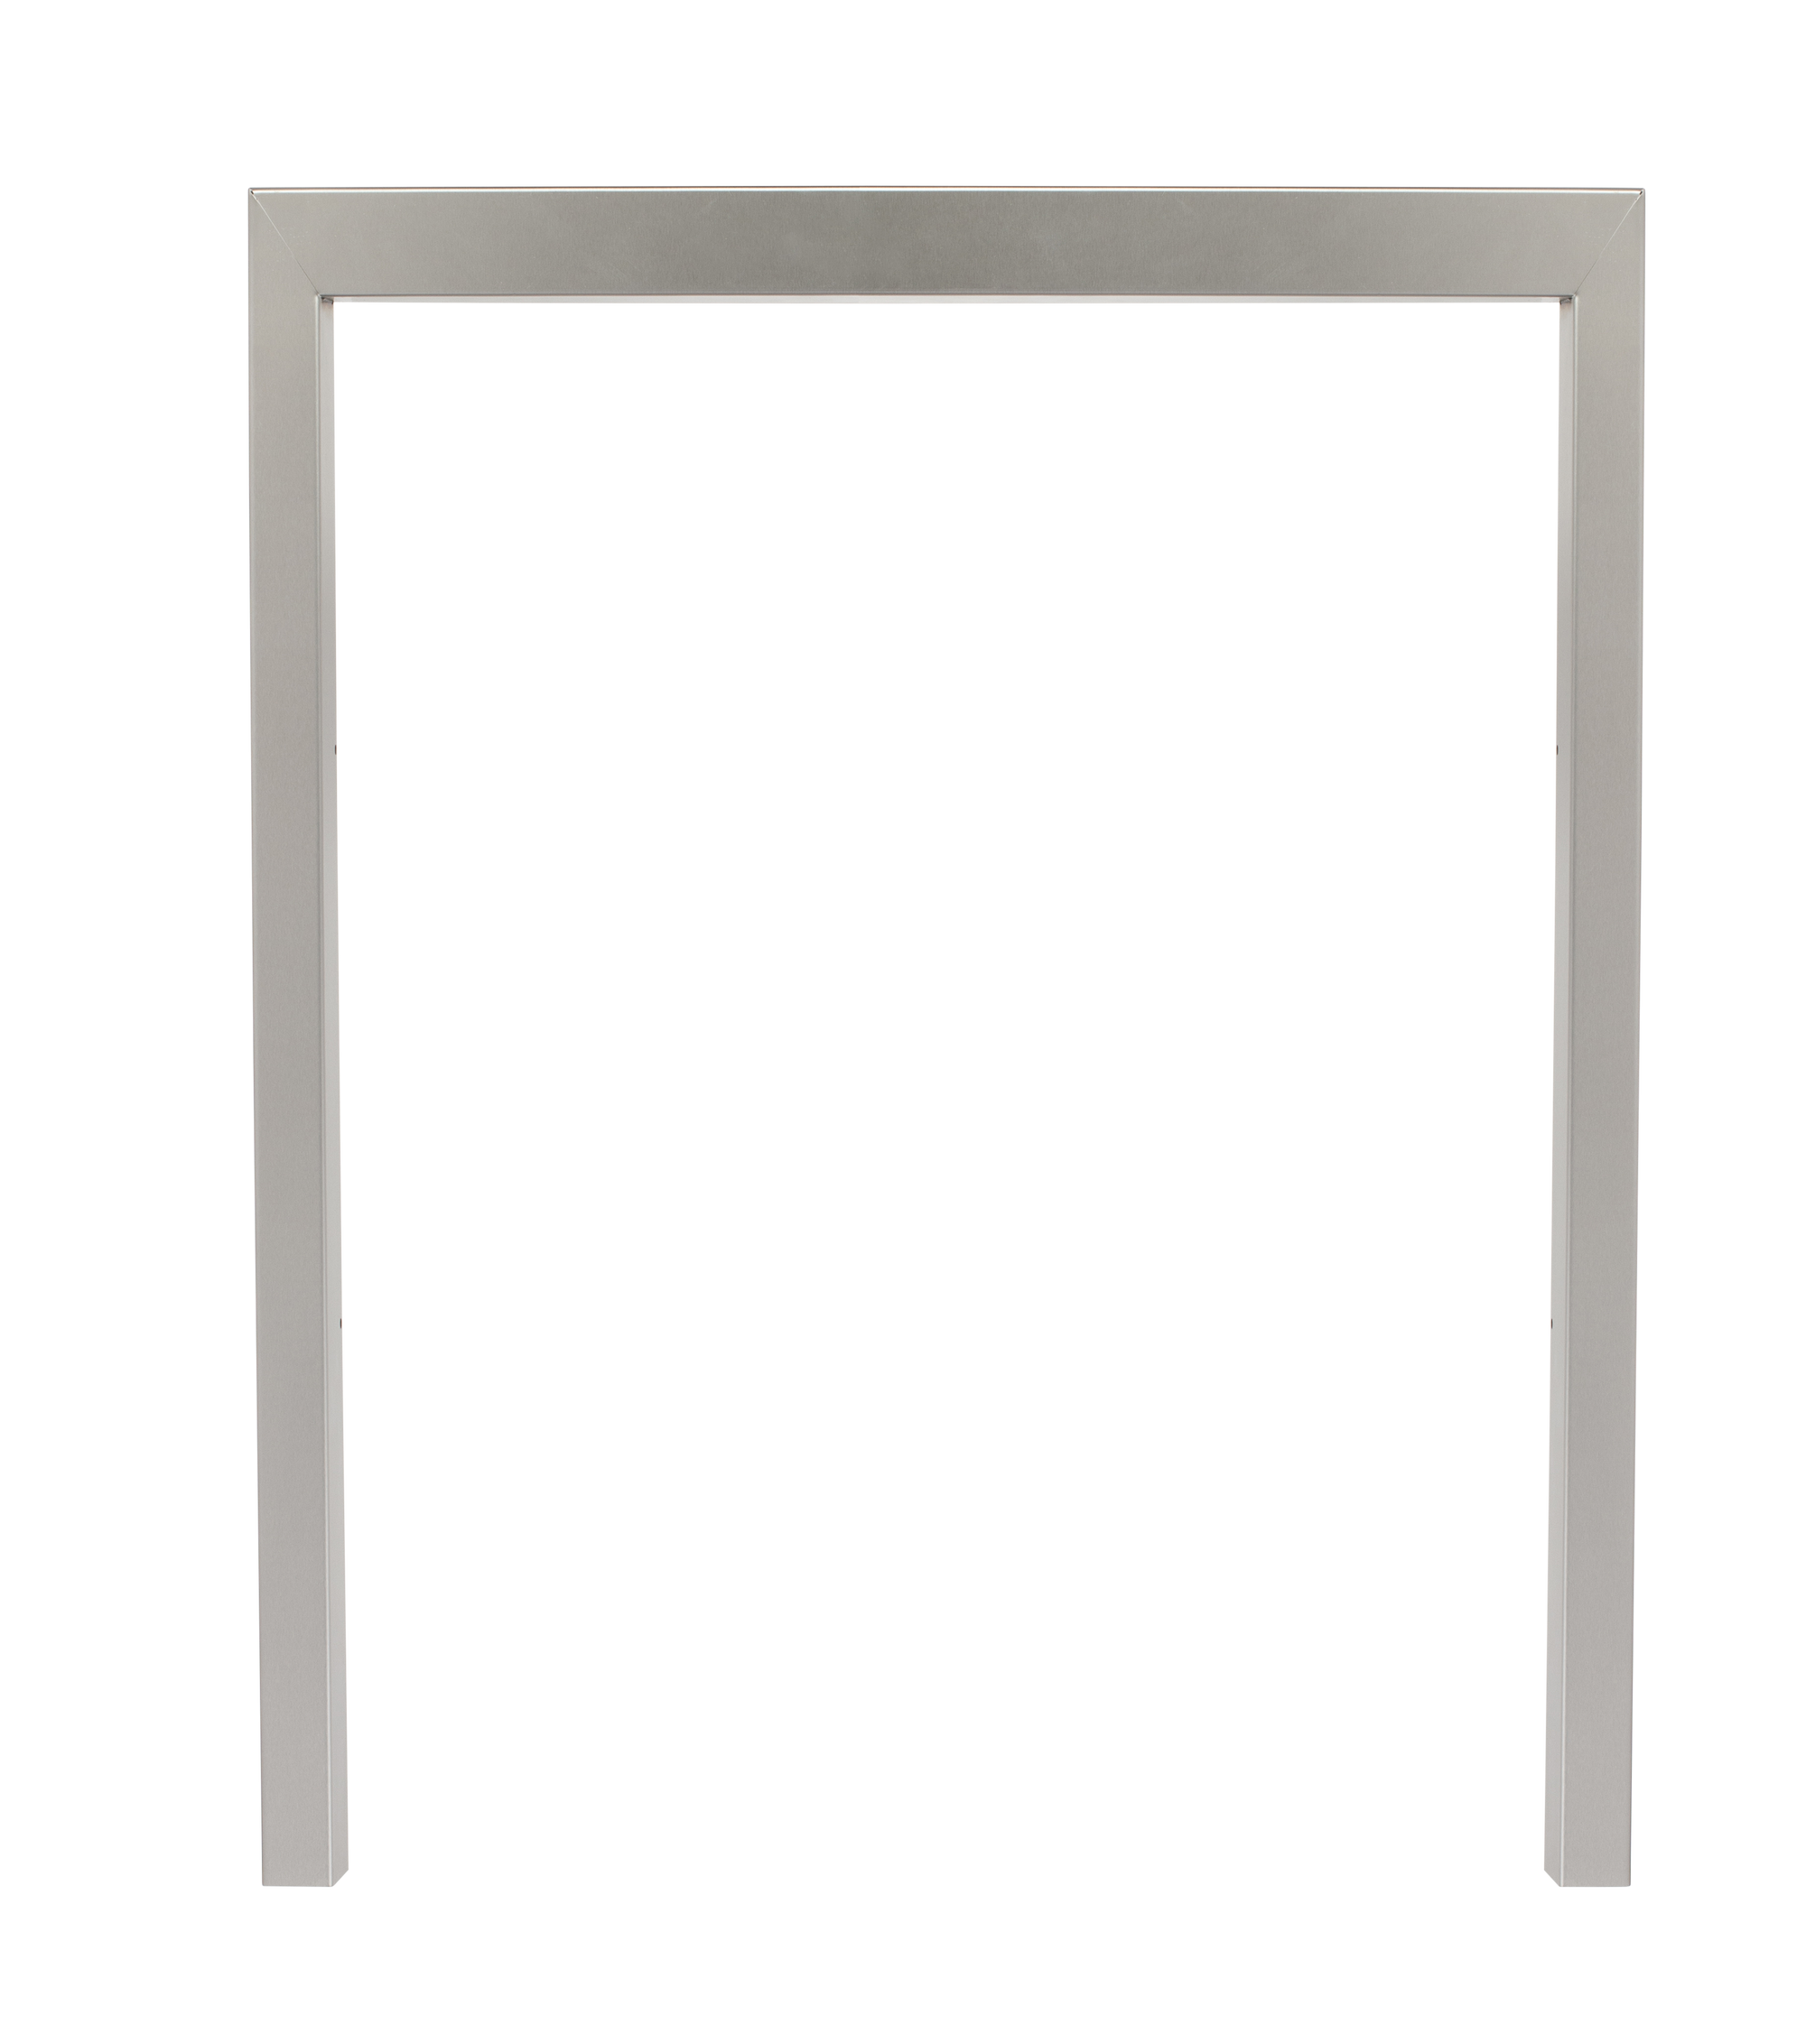 Bull Stainless Steel Refrigerator Finishing Frame with Reveal - Bull Contemporary (Standard)